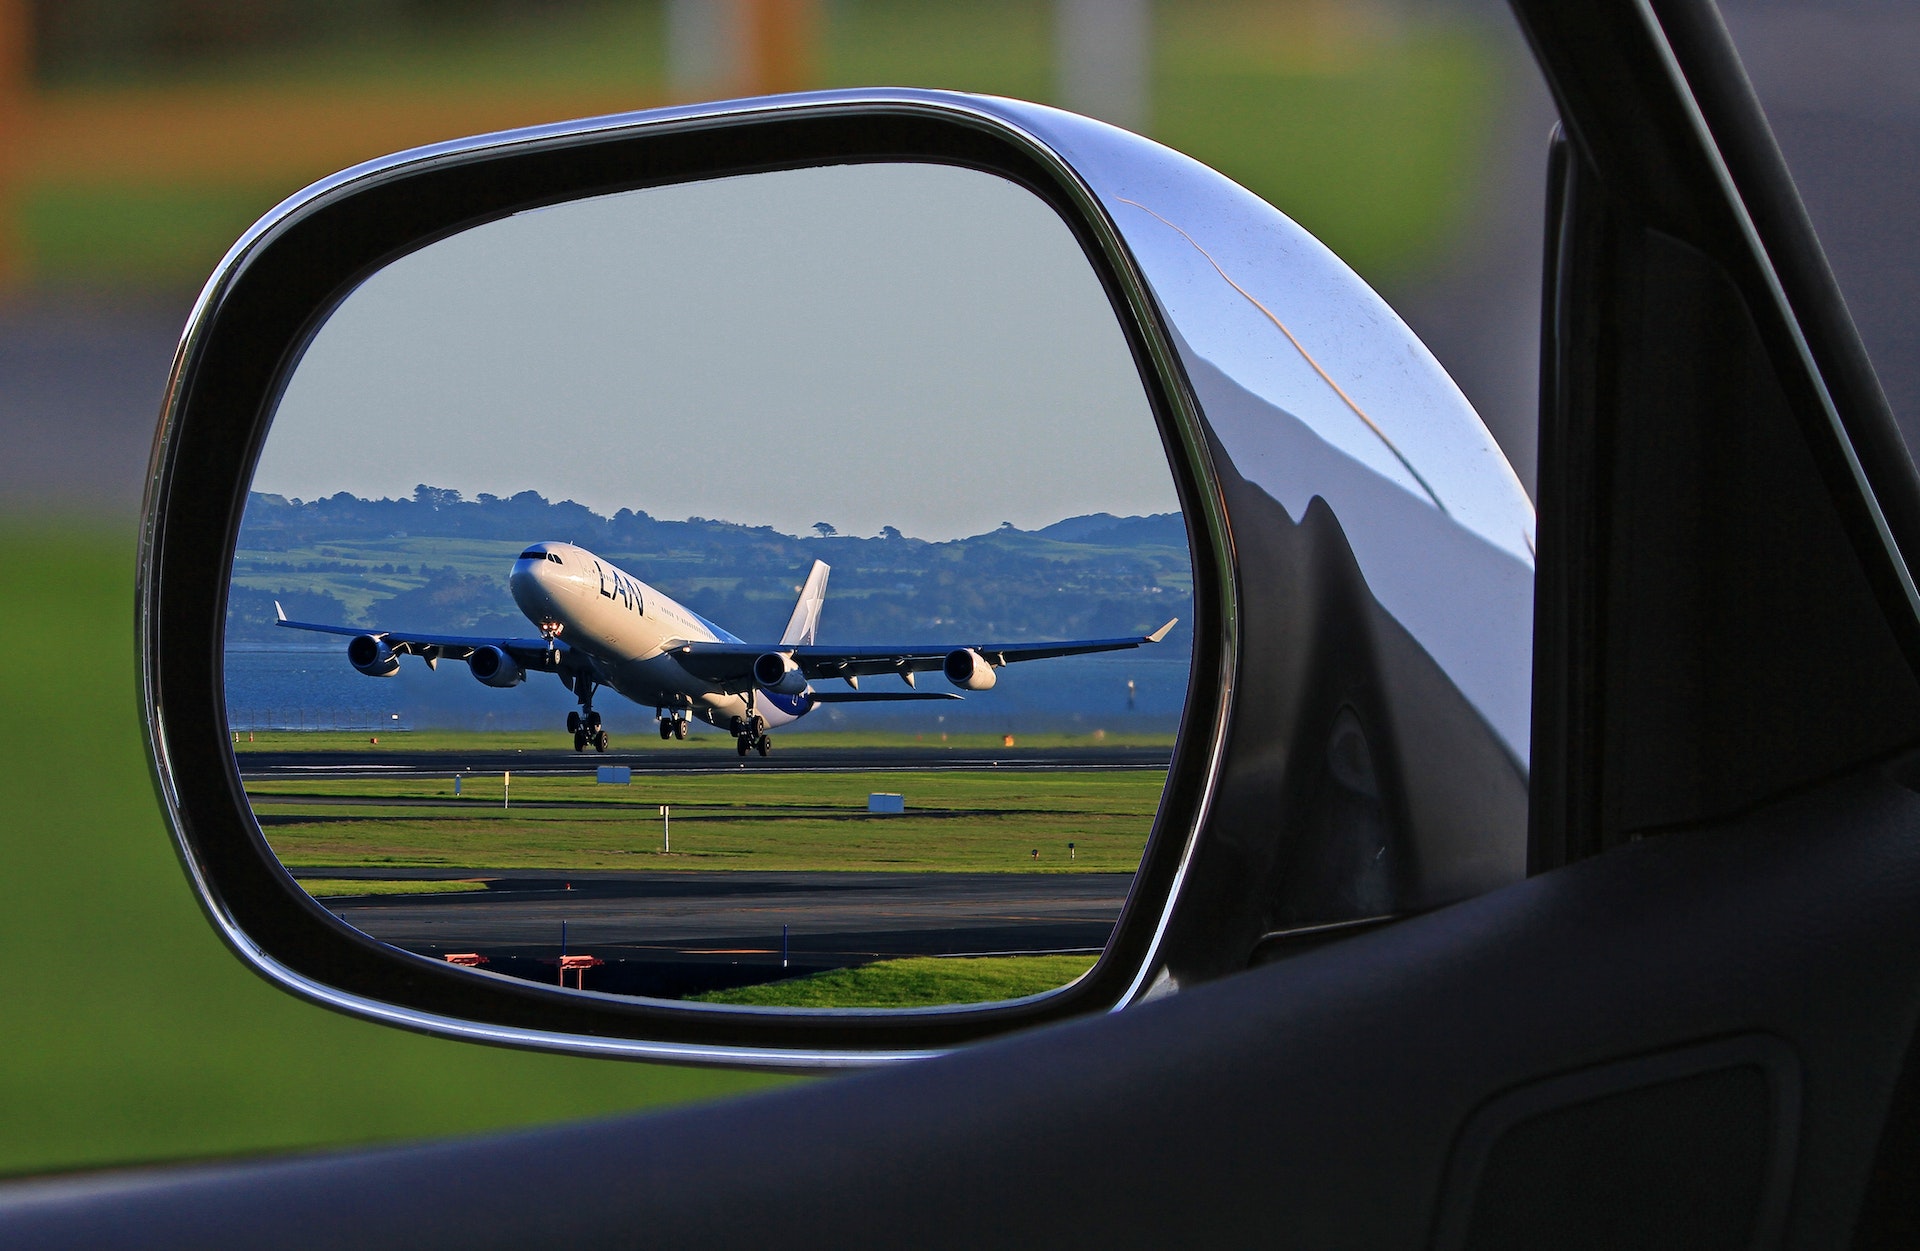 reflection of the airplane in the mirror